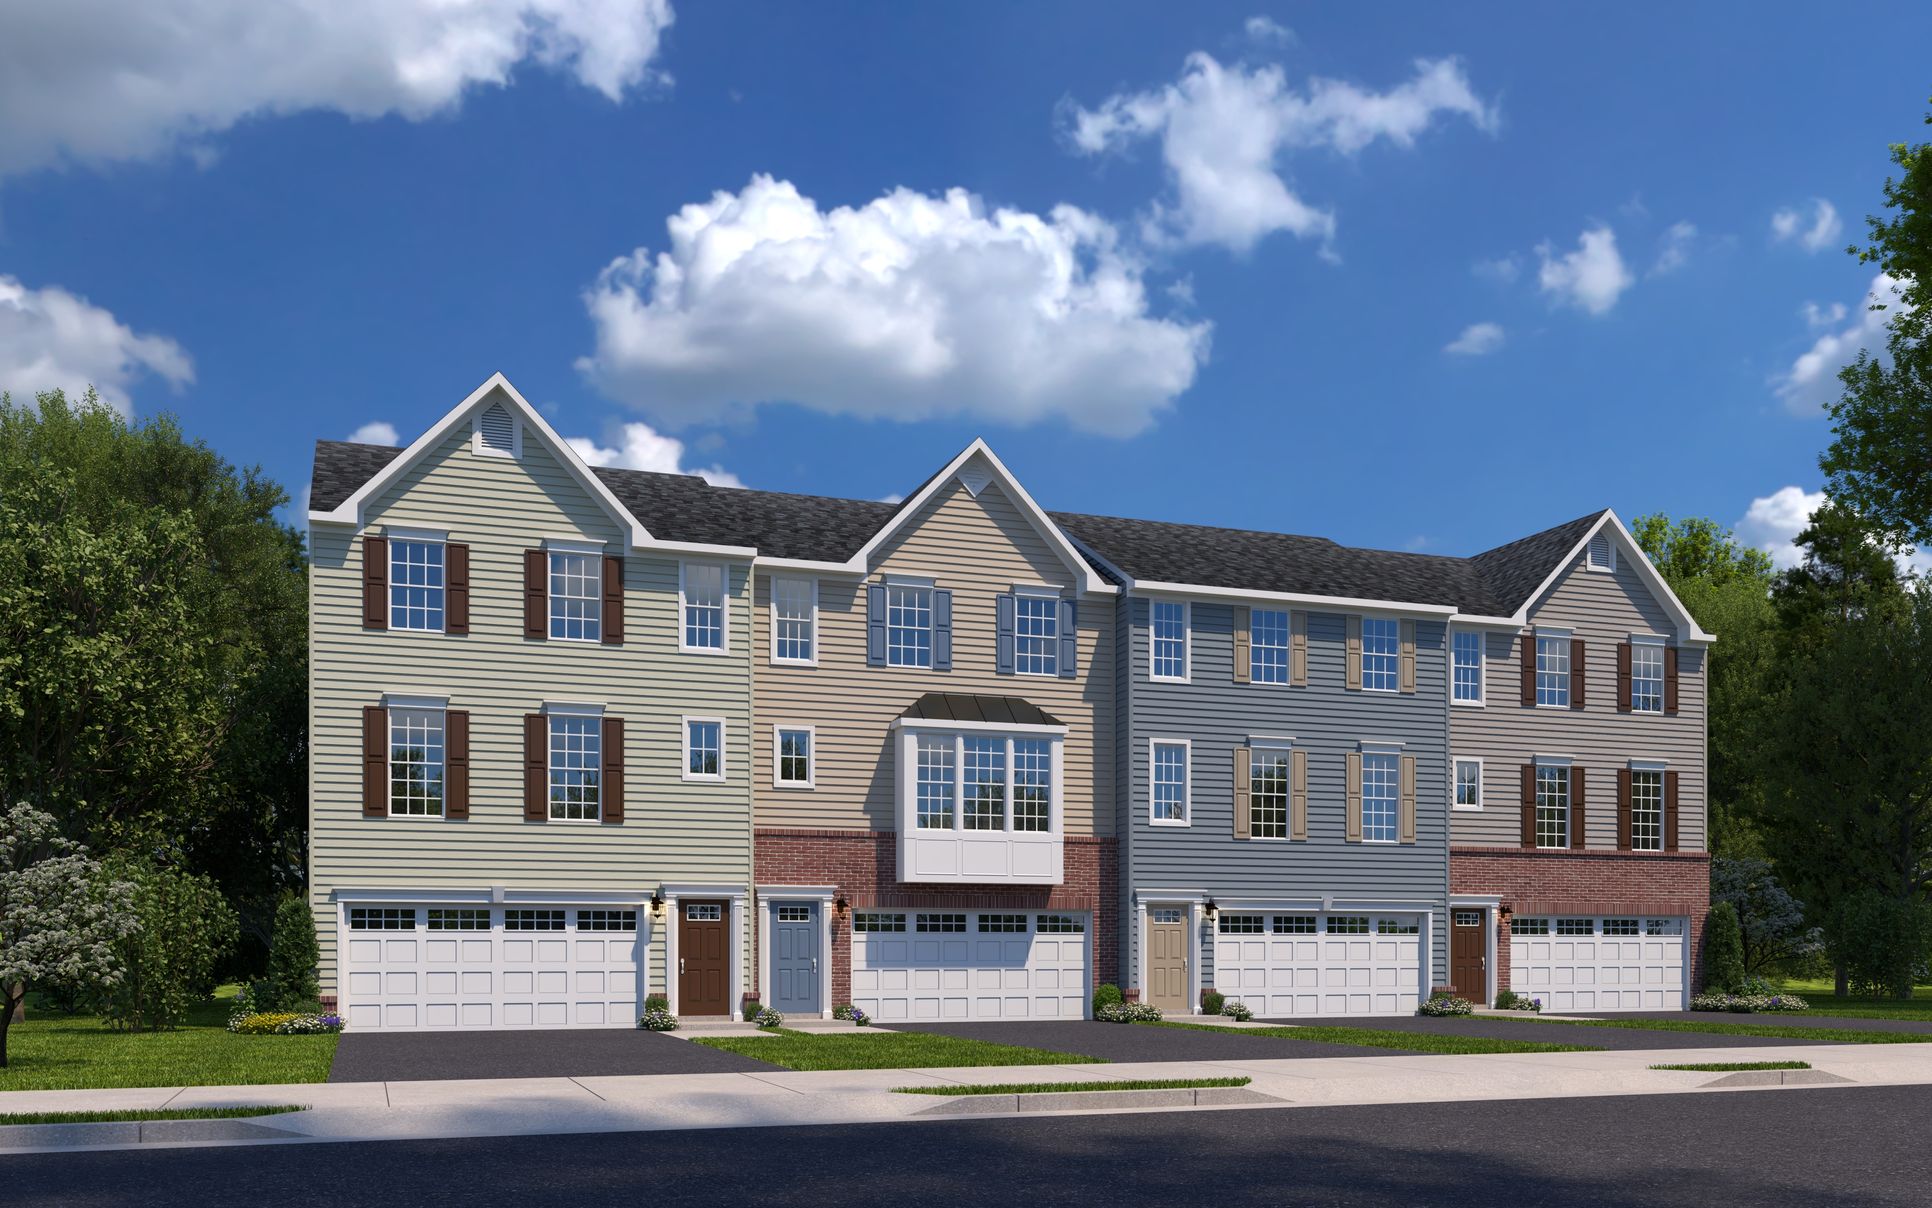 WOODMONT TRACE IS NOW OPEN FOR MODEL TOURS - JOIN THE LIST AND COME SEE US TODAY!